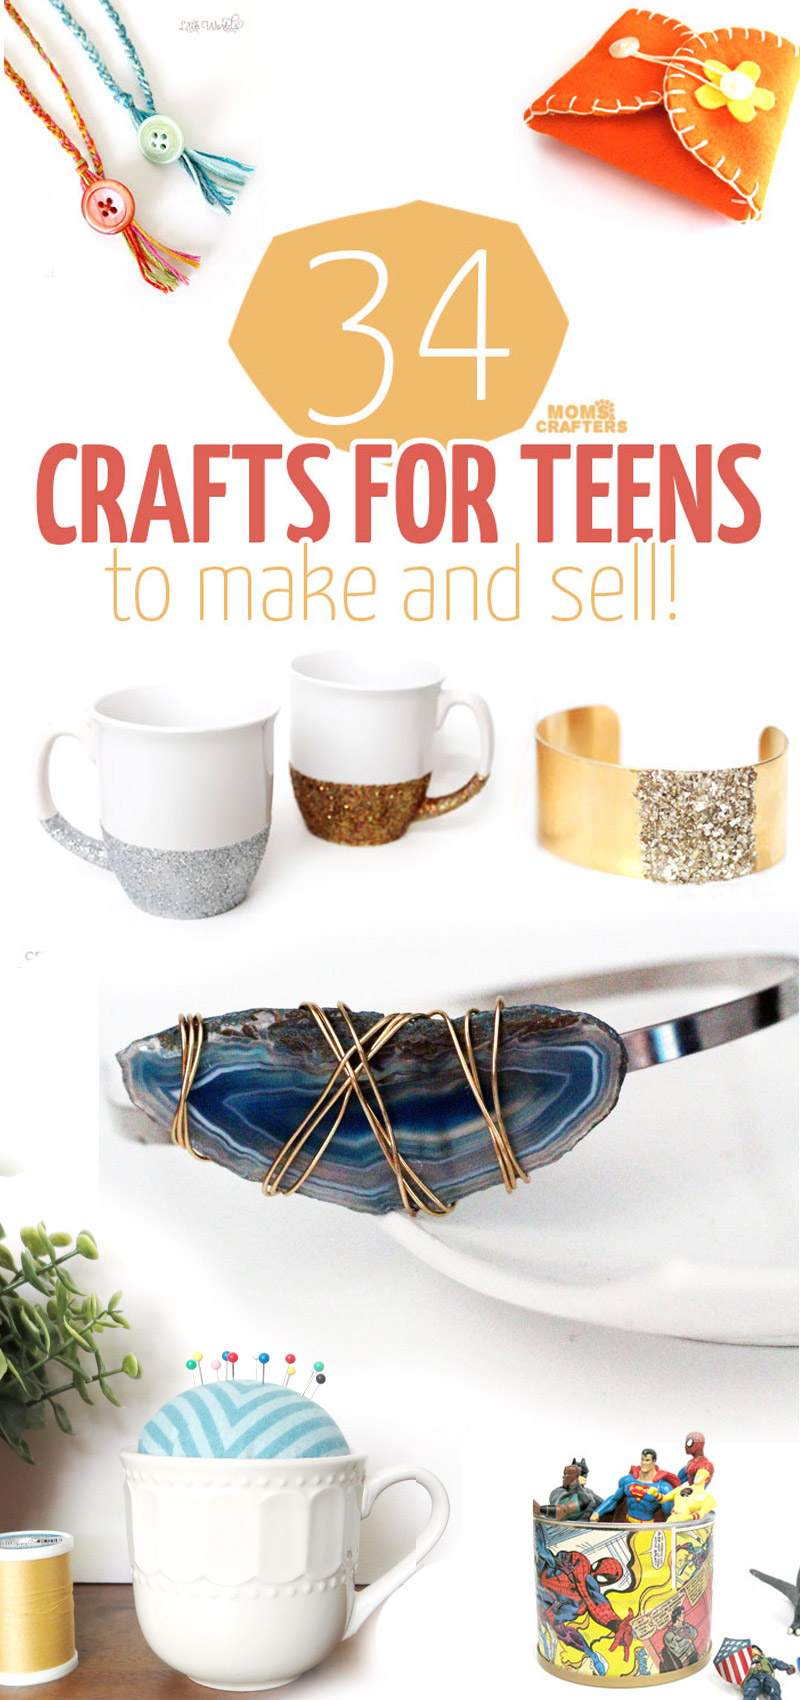 https://www.momsandcrafters.com/wp-content/uploads/2017/11/crafts-for-teens-to-make-and-sell-v2.jpg